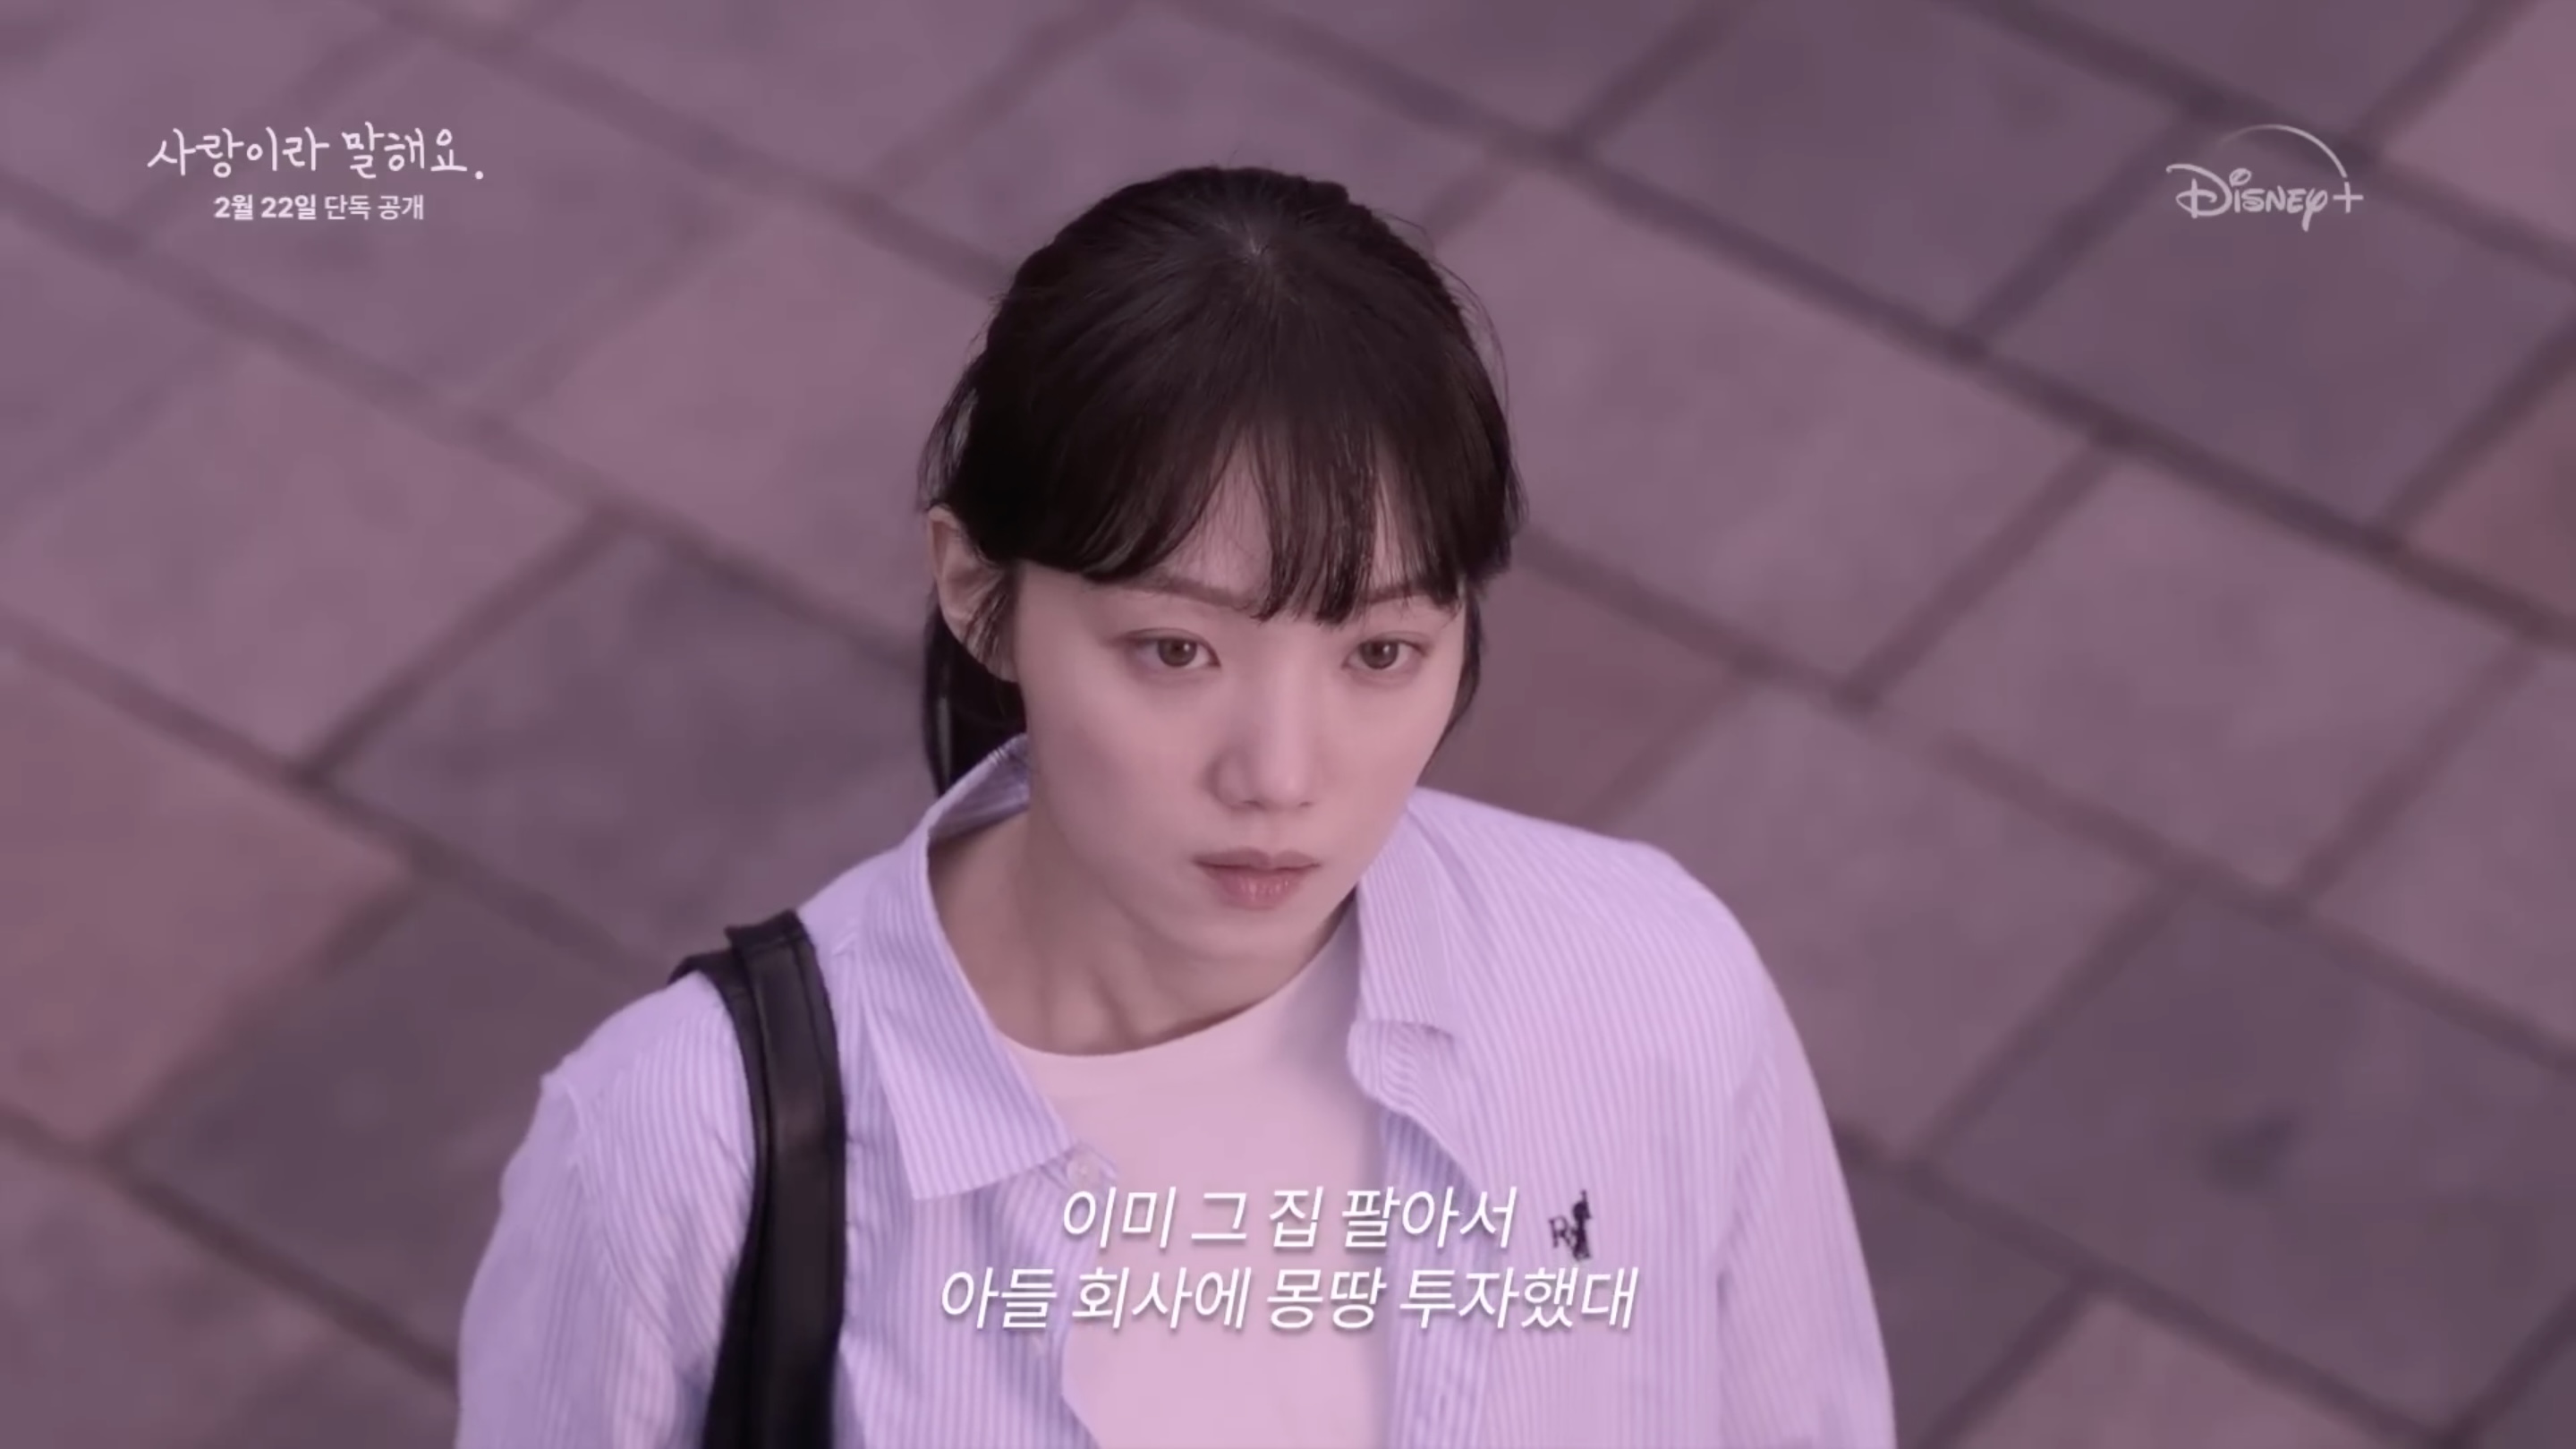 Amidst betrayal, can Lee Sung-kyung Call it Love?